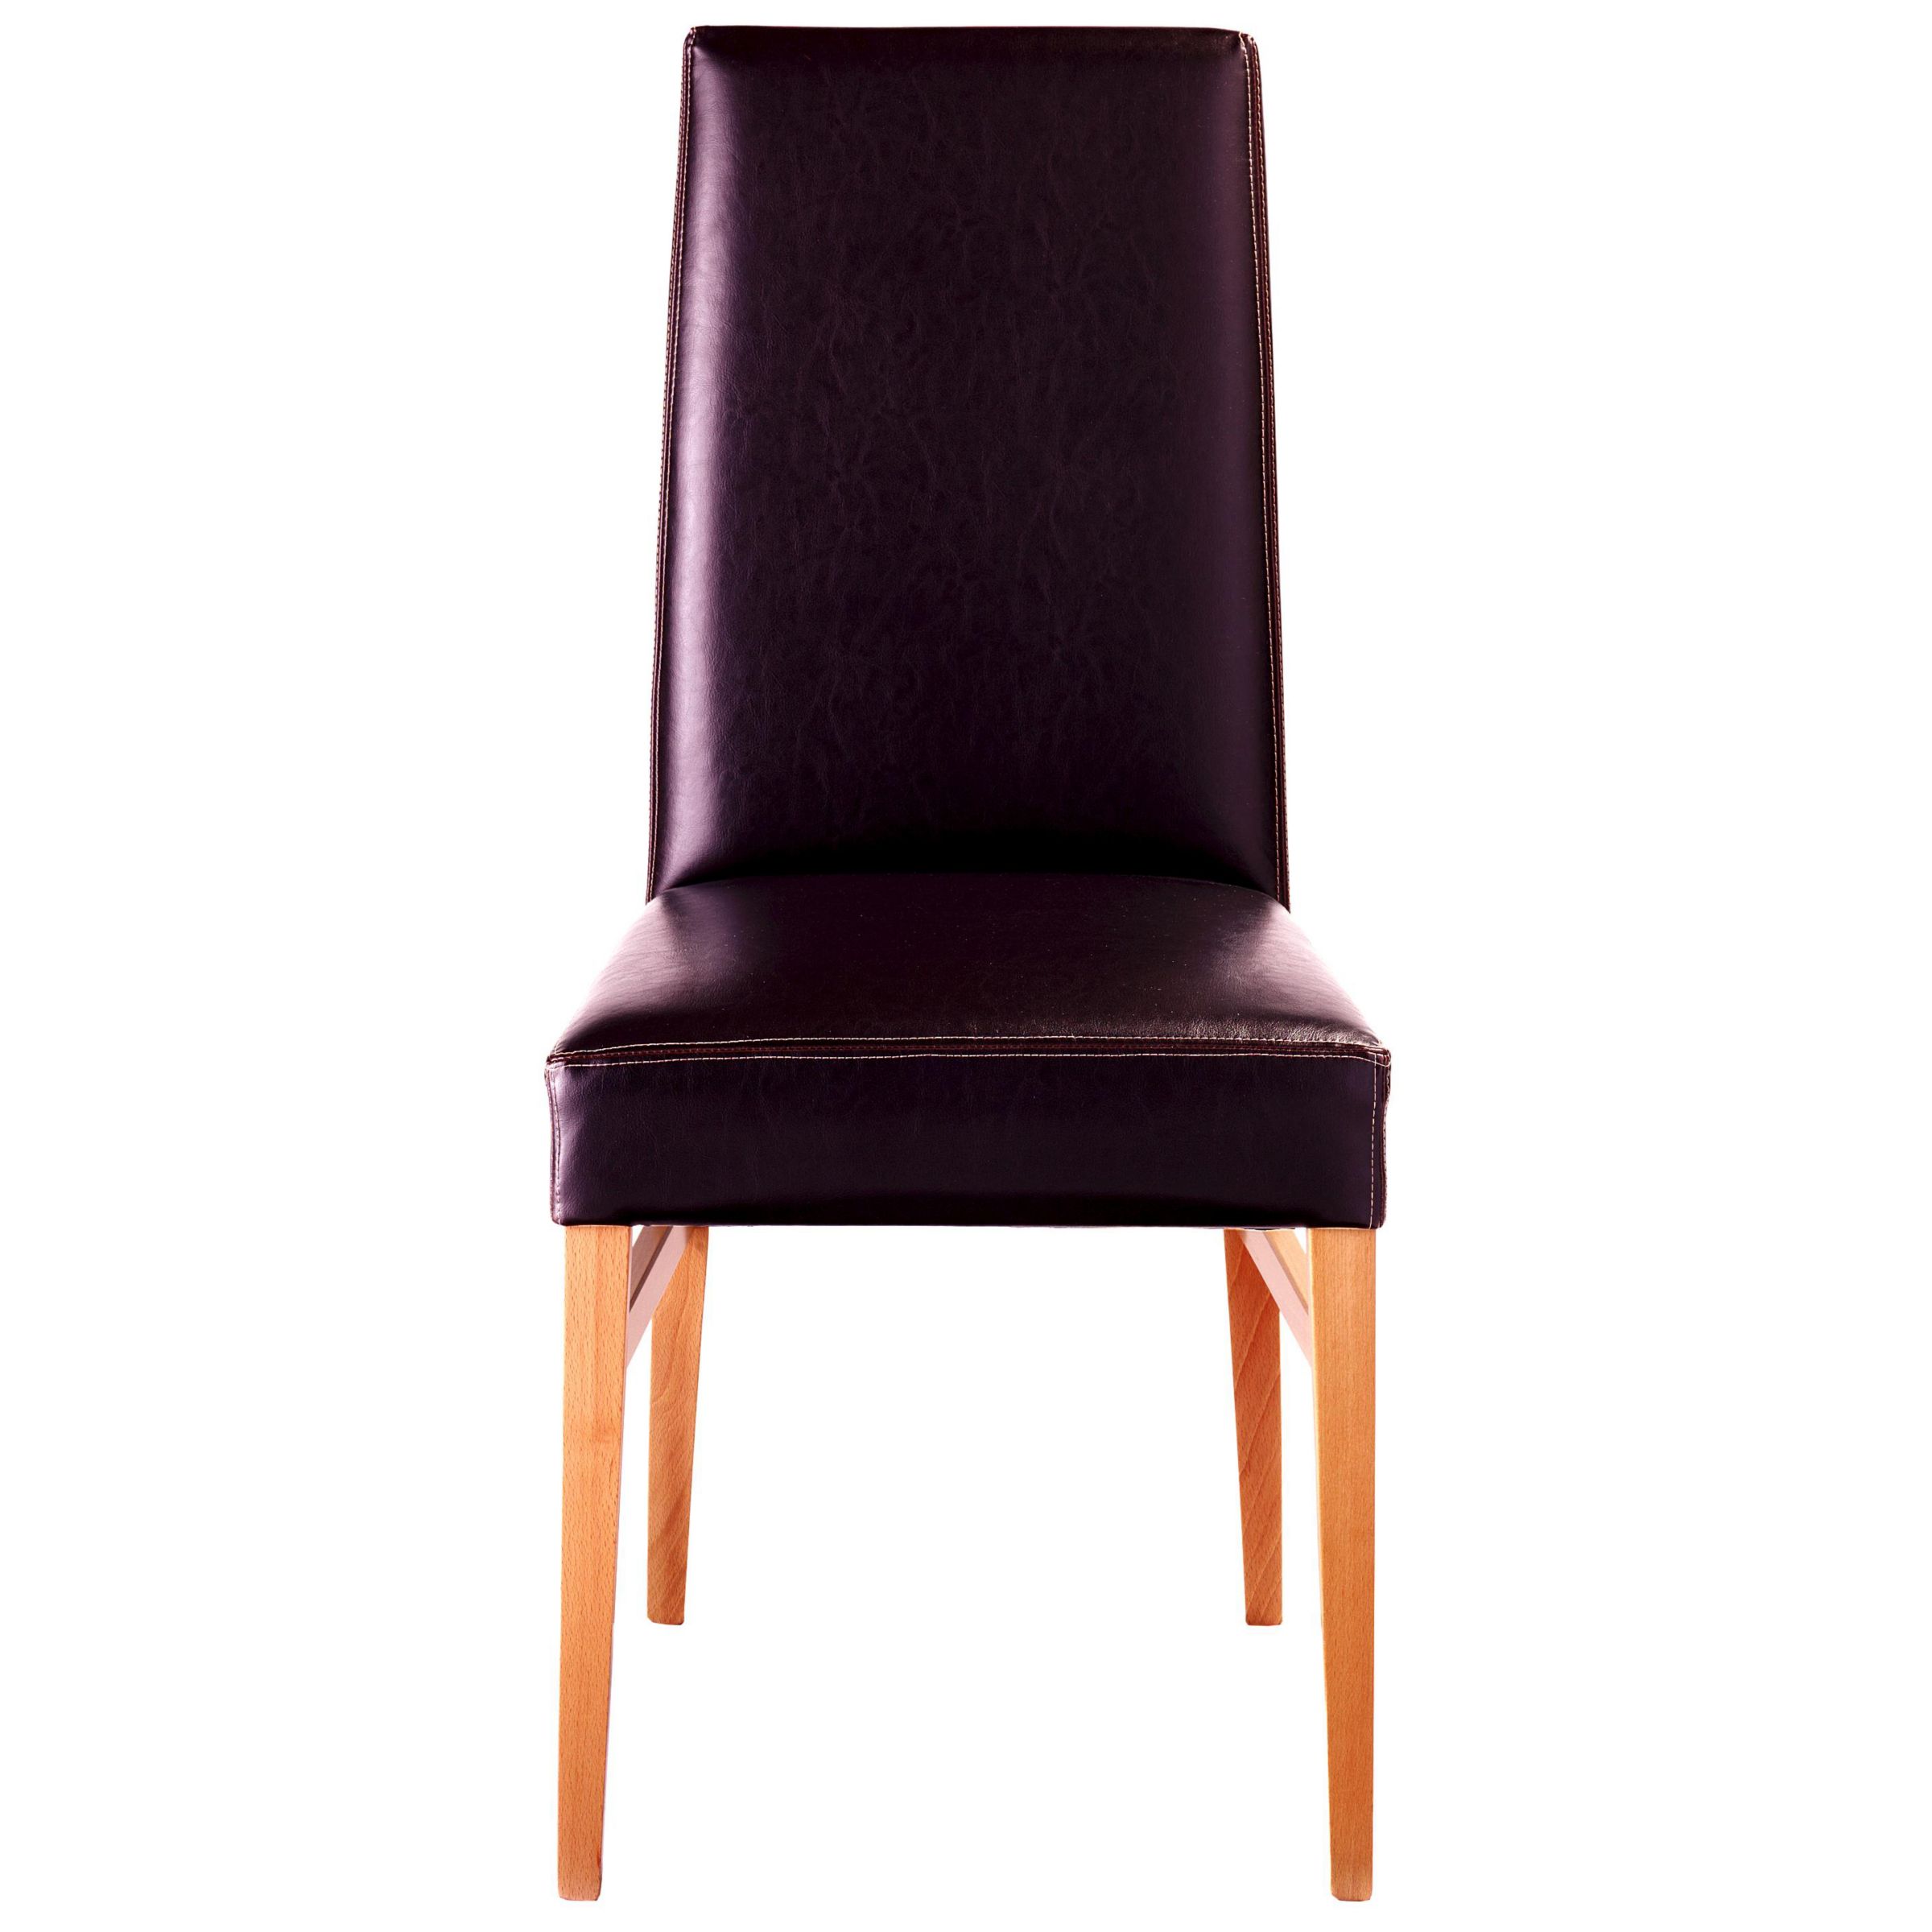 Miso Dining Chair, Chocolate